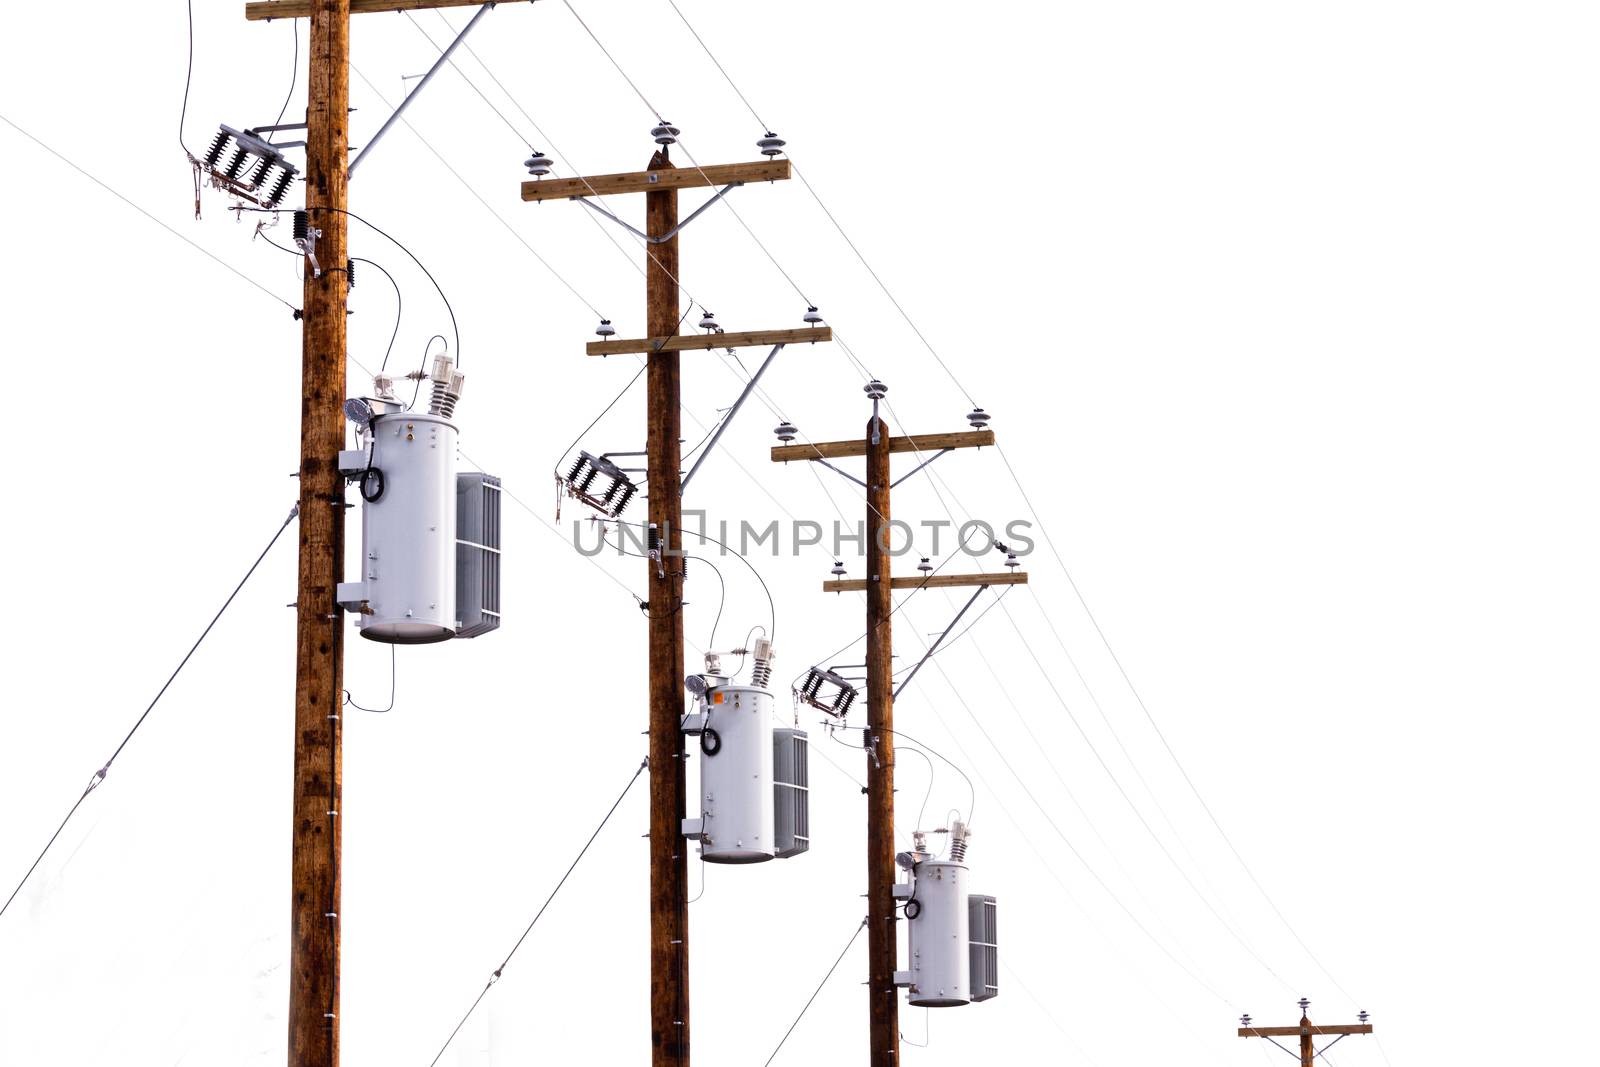 Row utility poles hung with electricity power cables and transformers for residential electric power supply isolated on white background